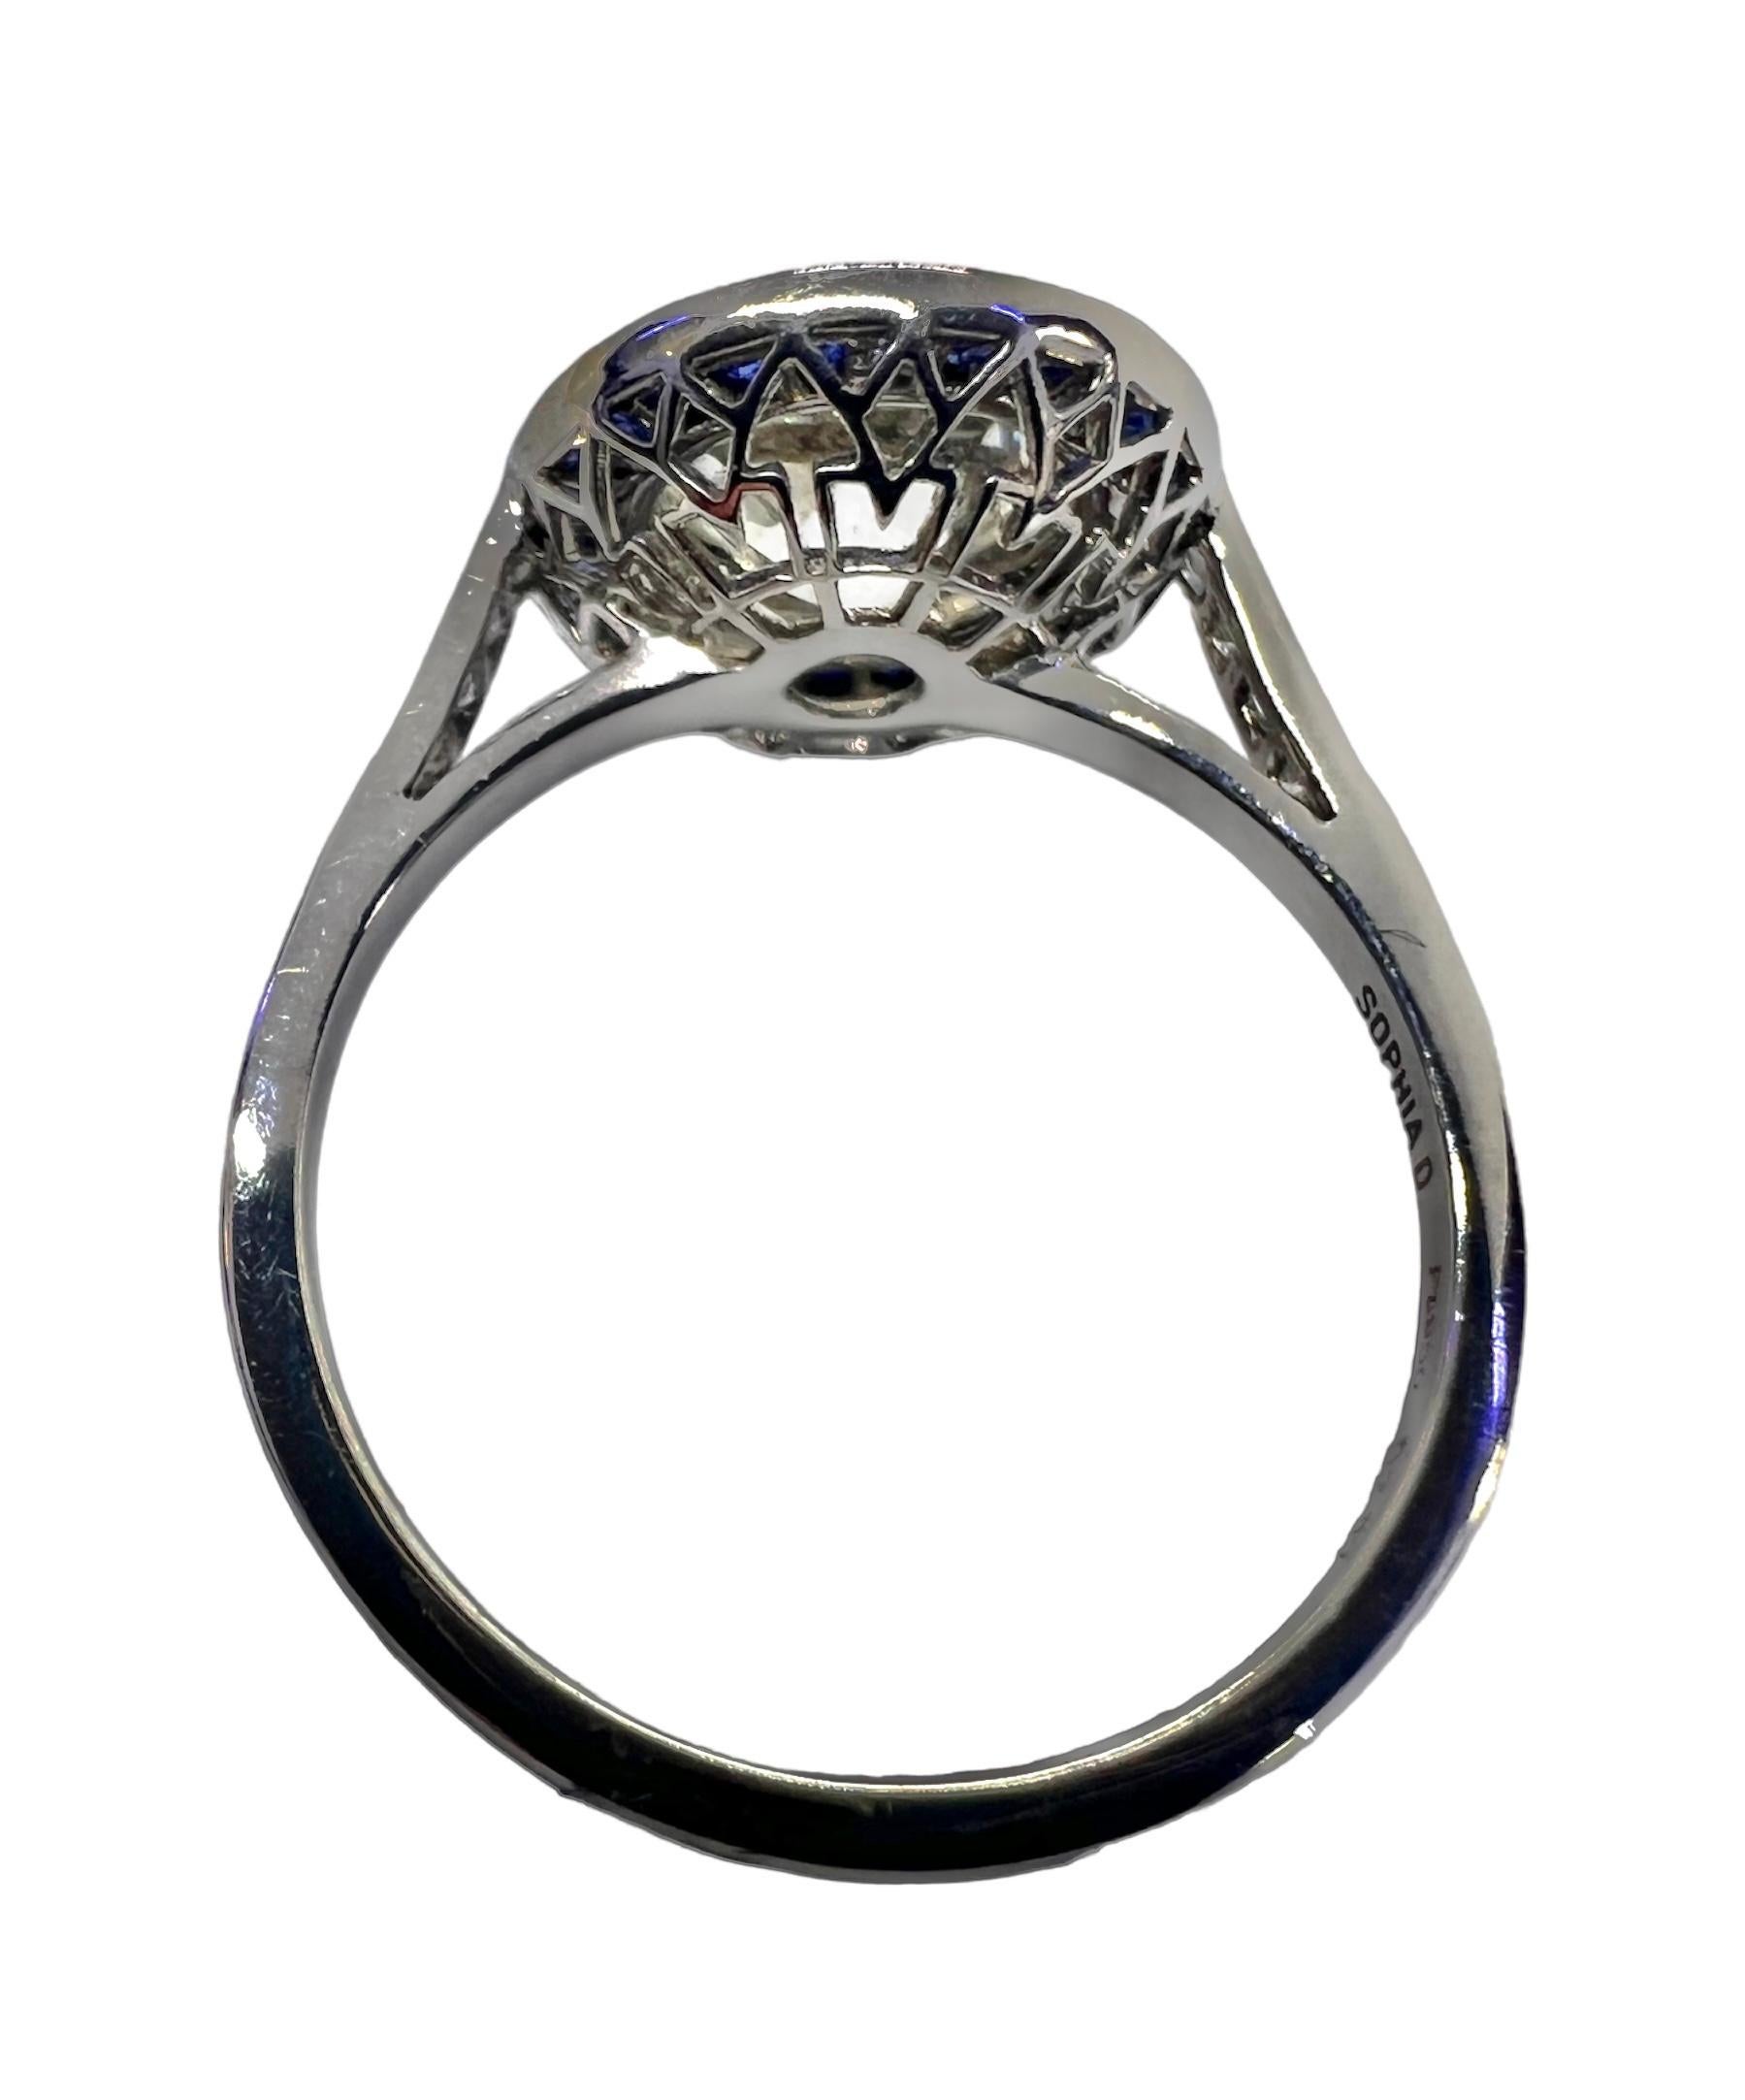 Sophia D. 2.07 Carat Diamond and Blue Sapphire Art Deco Ring In New Condition For Sale In New York, NY